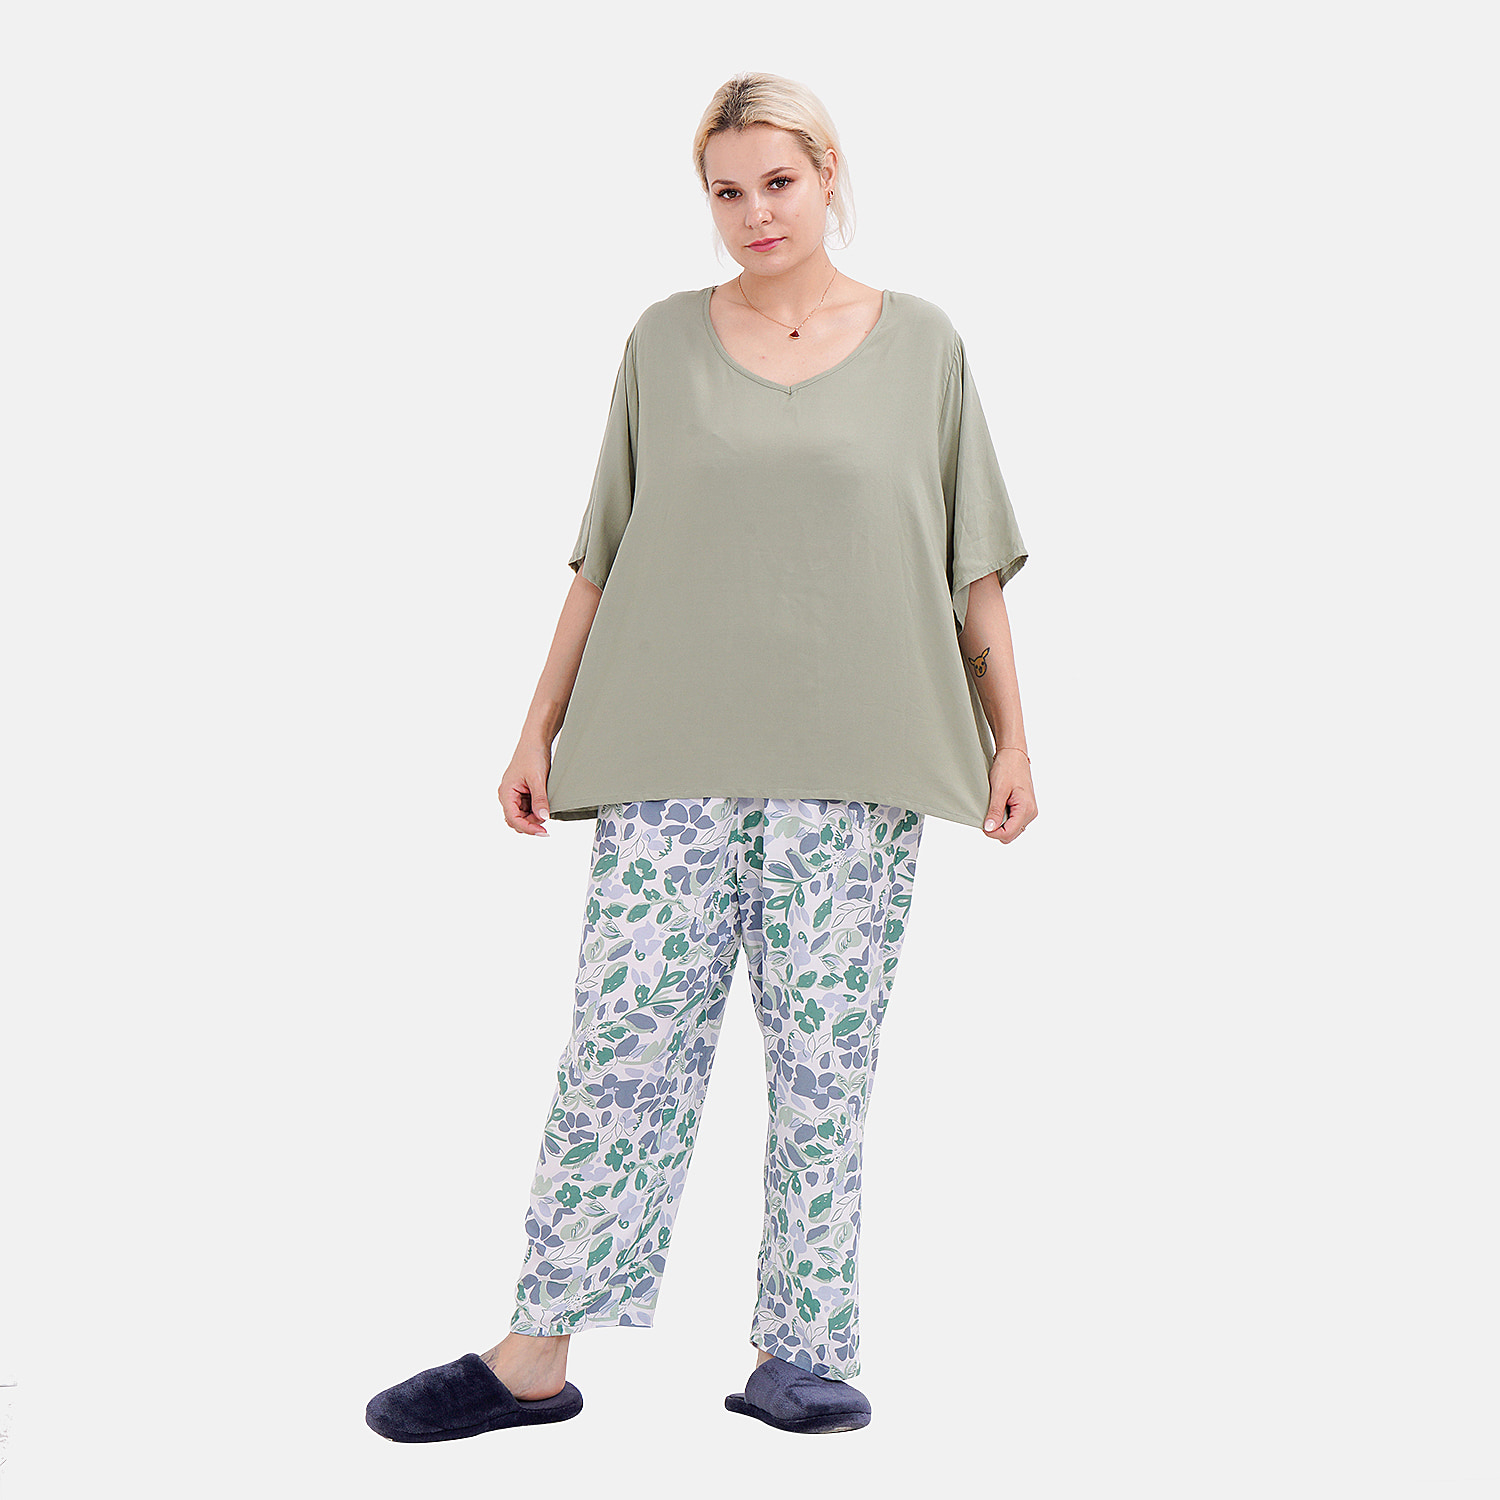 LA MAREY Loungewear Sets (Short Sleeves Top with Printed Trousers)  - Green (Size L)